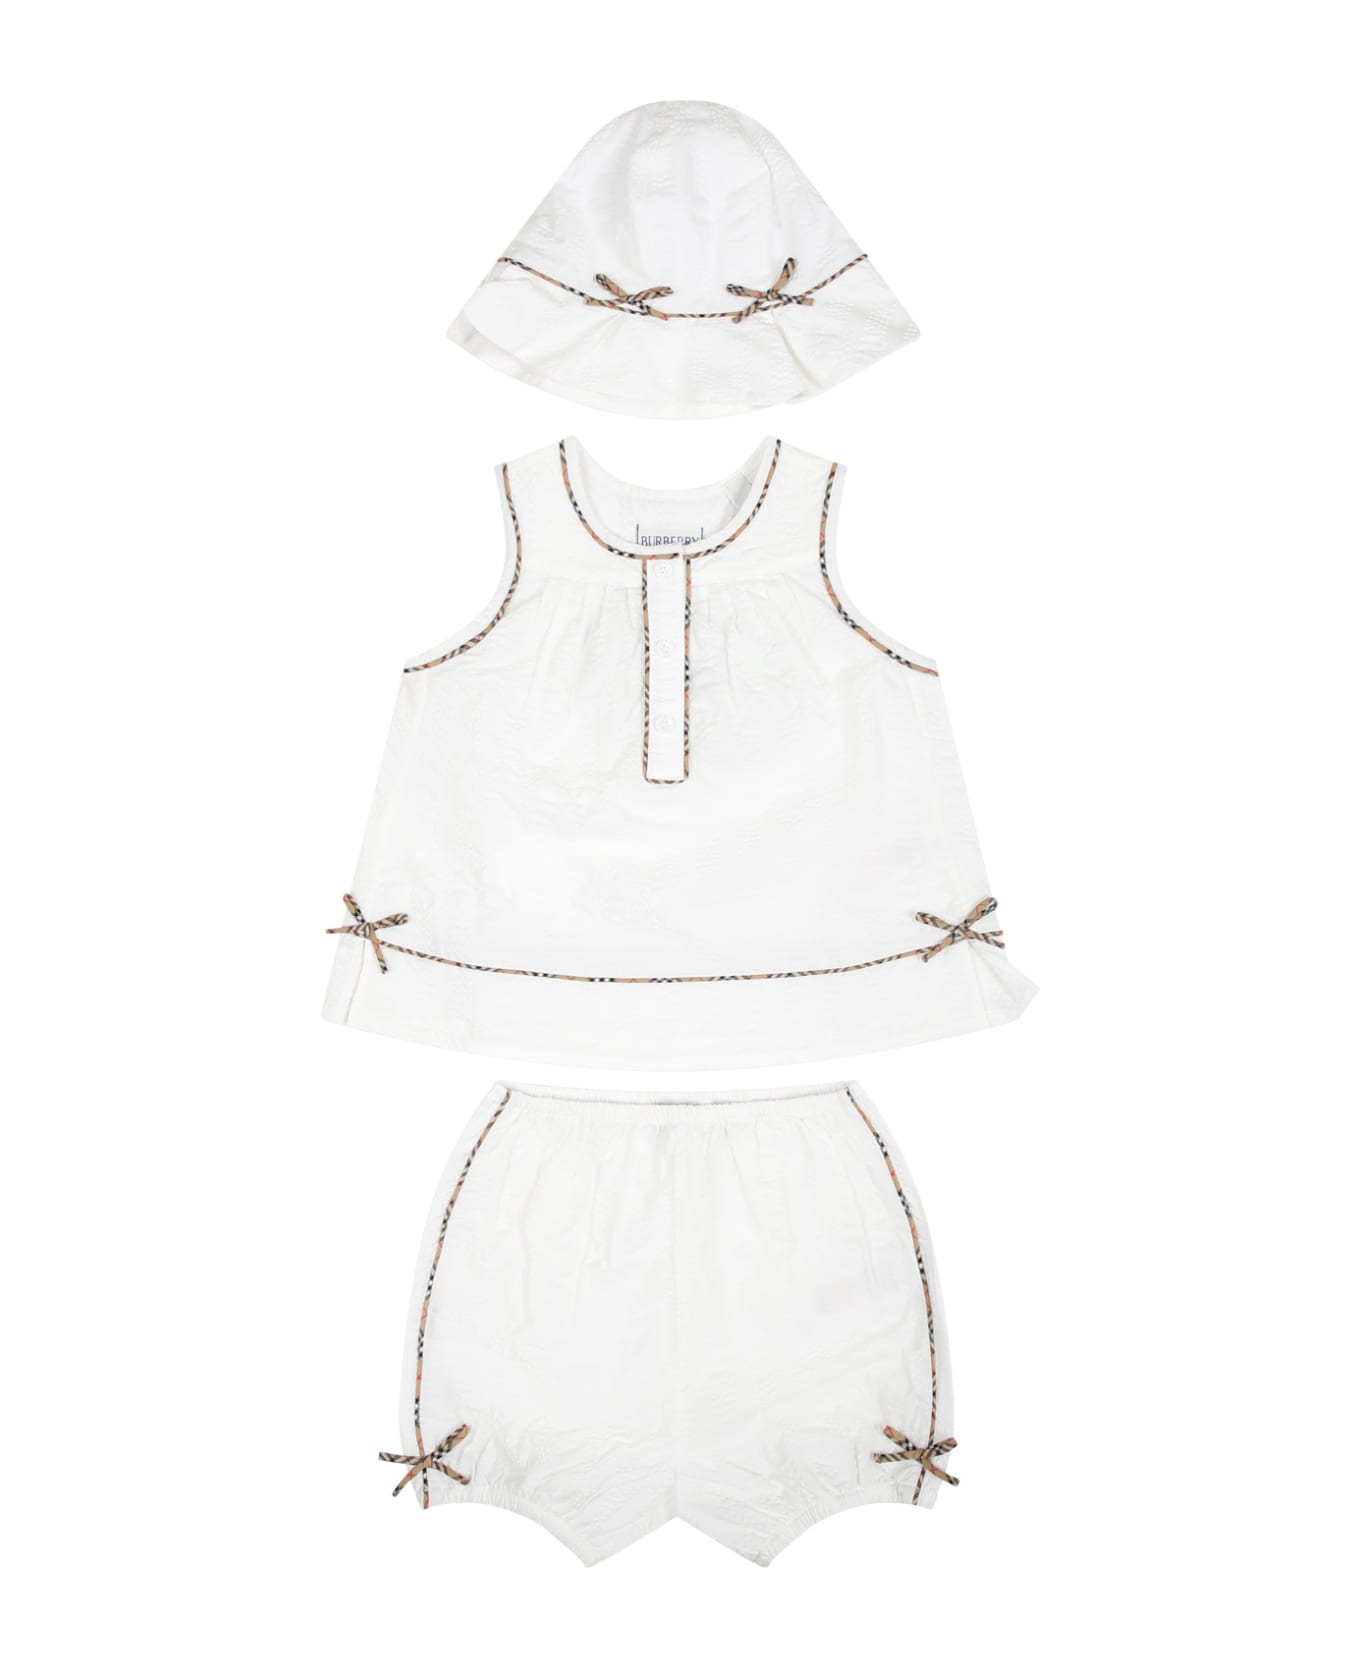 Burberry White Sports Suit For Baby Girl - White